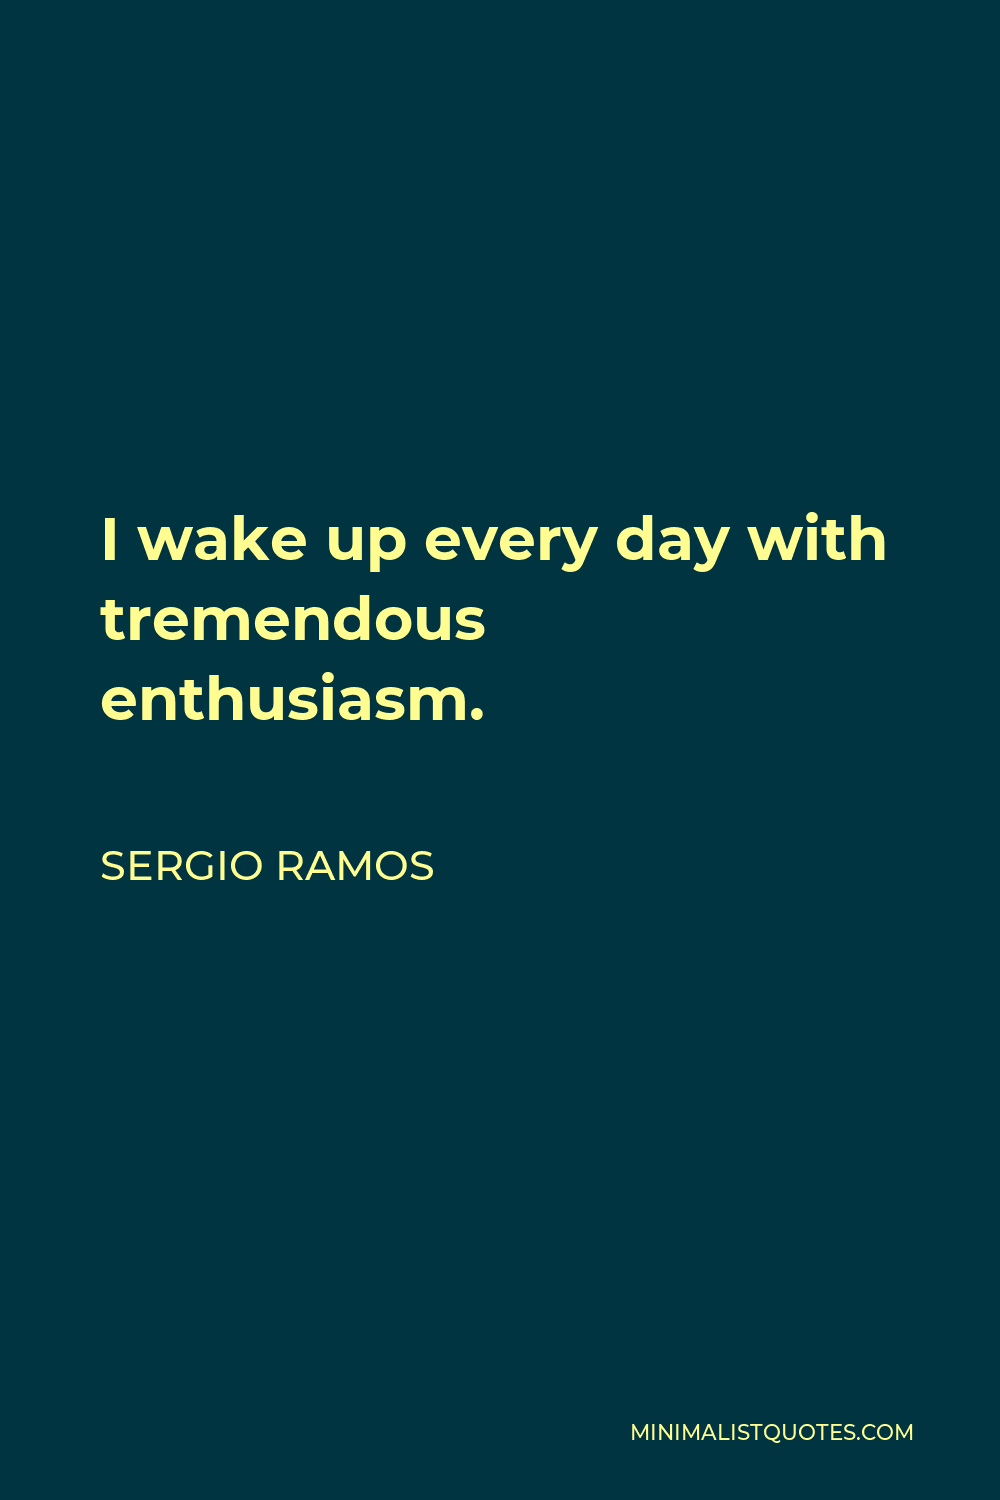 Sergio Ramos Quote - I wake up every day with tremendous enthusiasm.